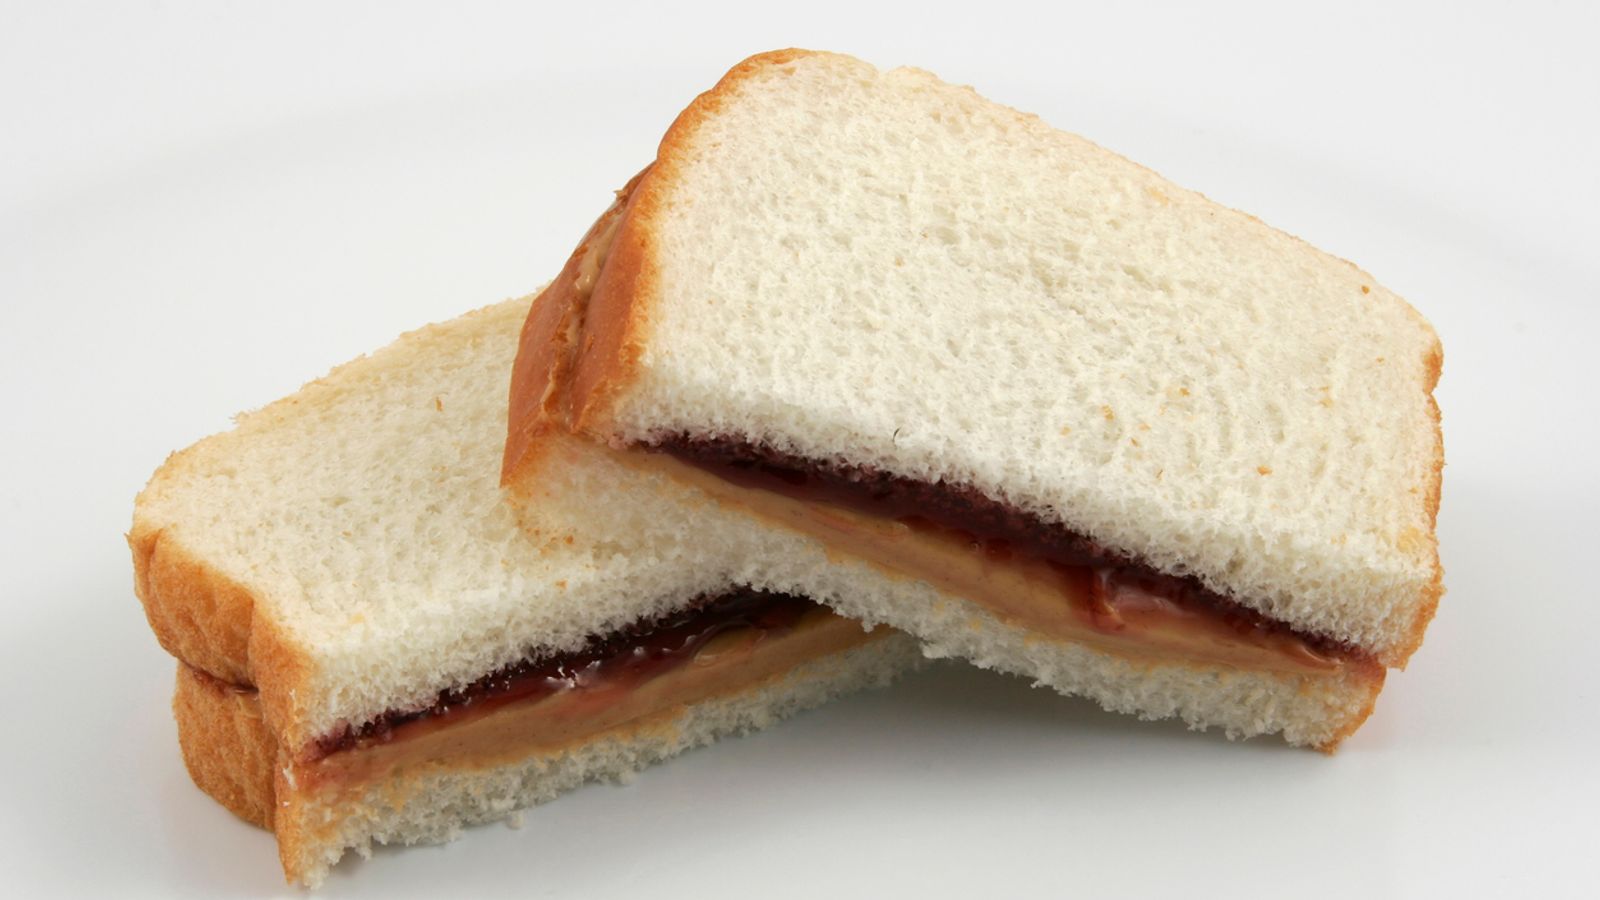 Man dies in Germany four years after colleague poisoned his sandwich ...